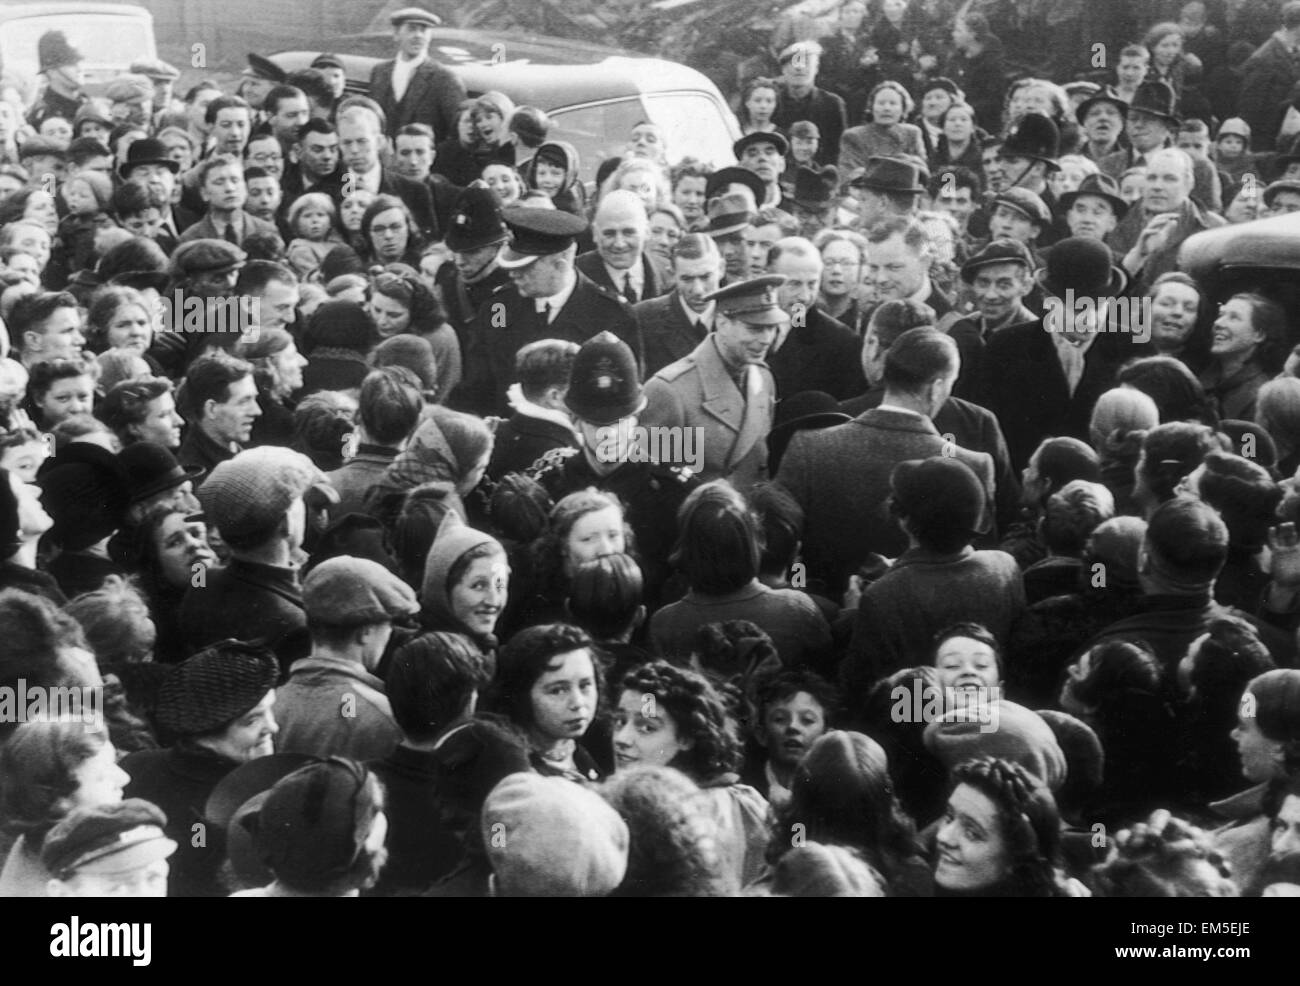 King George VI surrounded by a crowd of enthusiastic people welcoming him to the bomb damaged city of Birmingham following an air raid. December 1940. Stock Photo